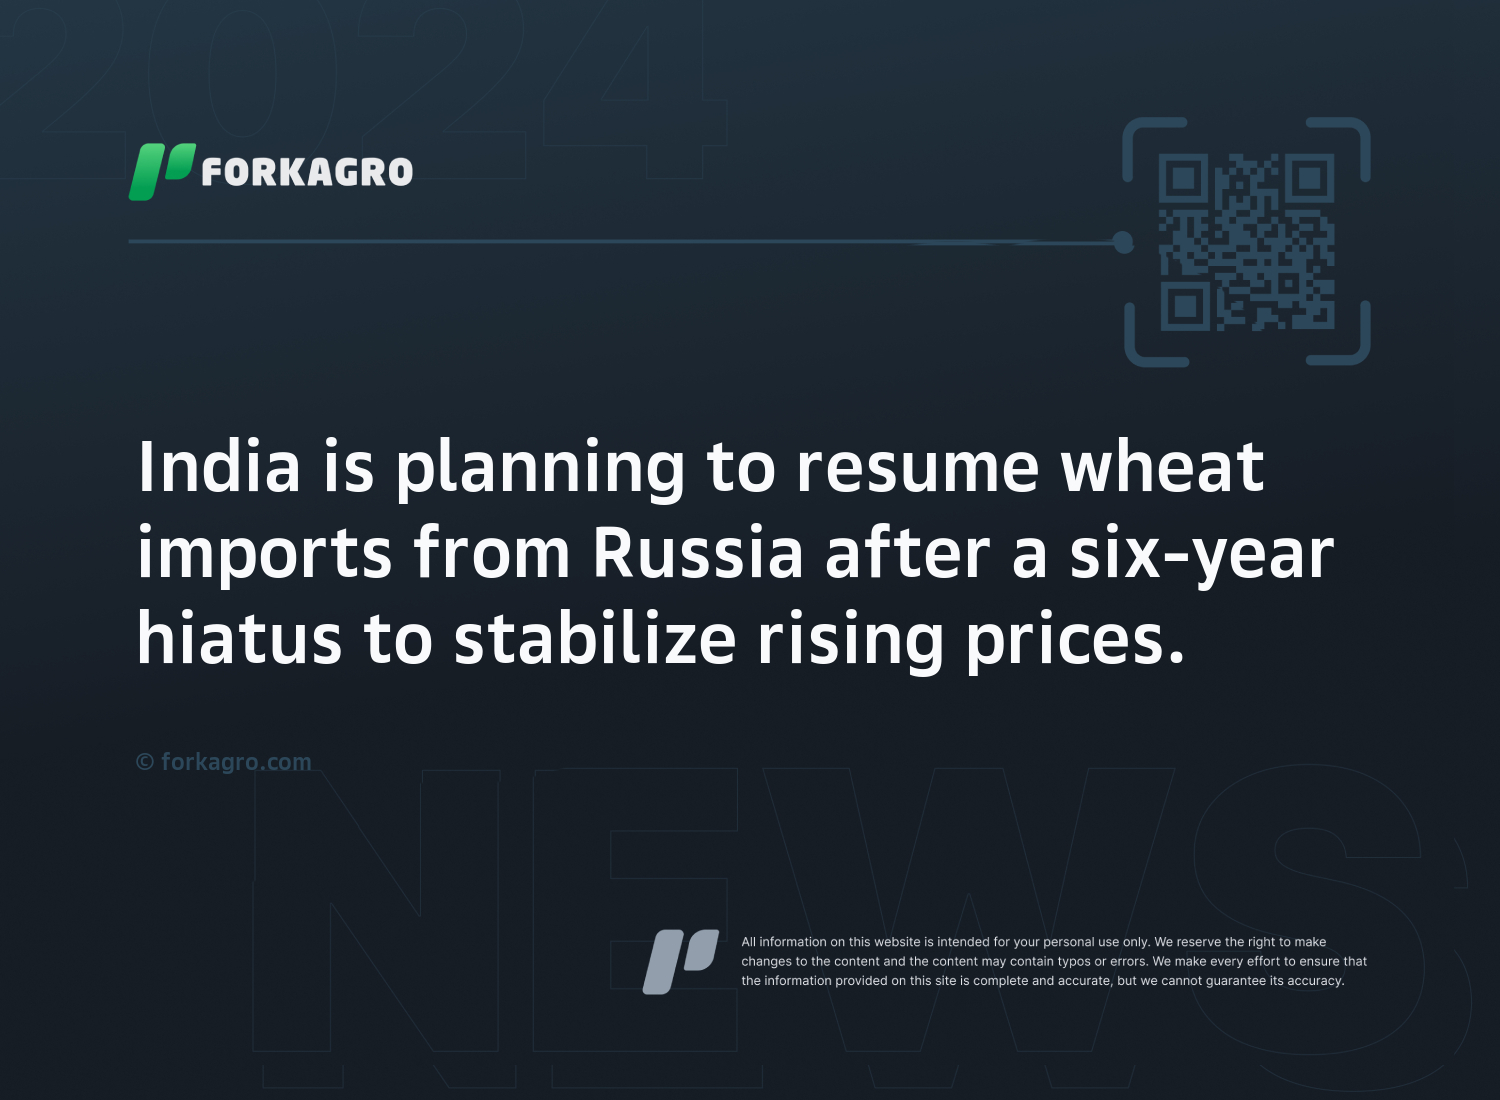 India is planning to resume wheat imports from Russia after a six-year hiatus to stabilize rising prices.